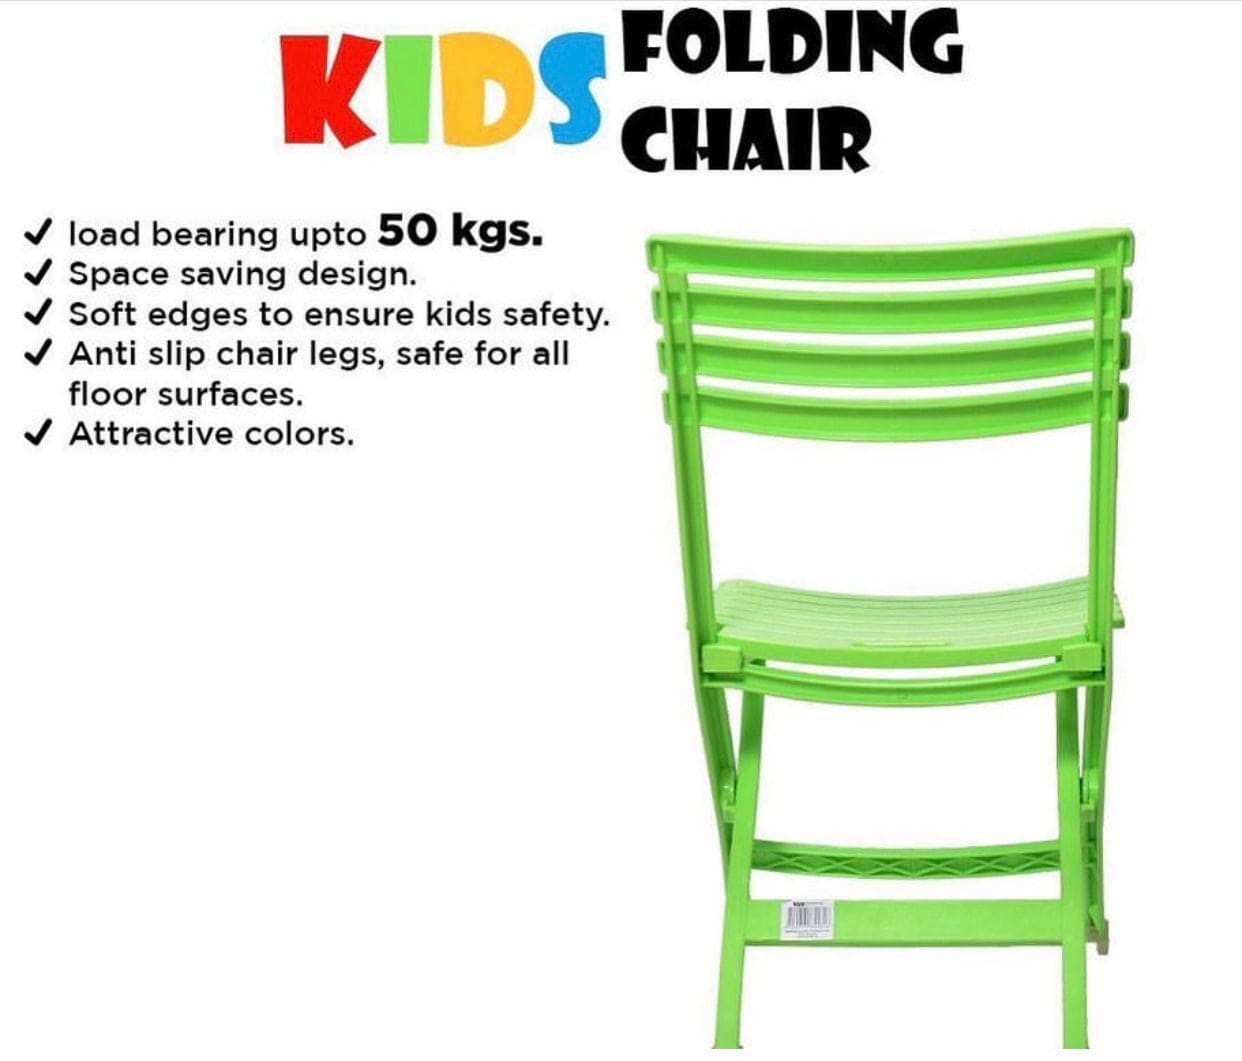 Kids Folding Chair, Outdoor Leisure Balcony Chair, Play Eating Coffee Table, Folding Garden Chair